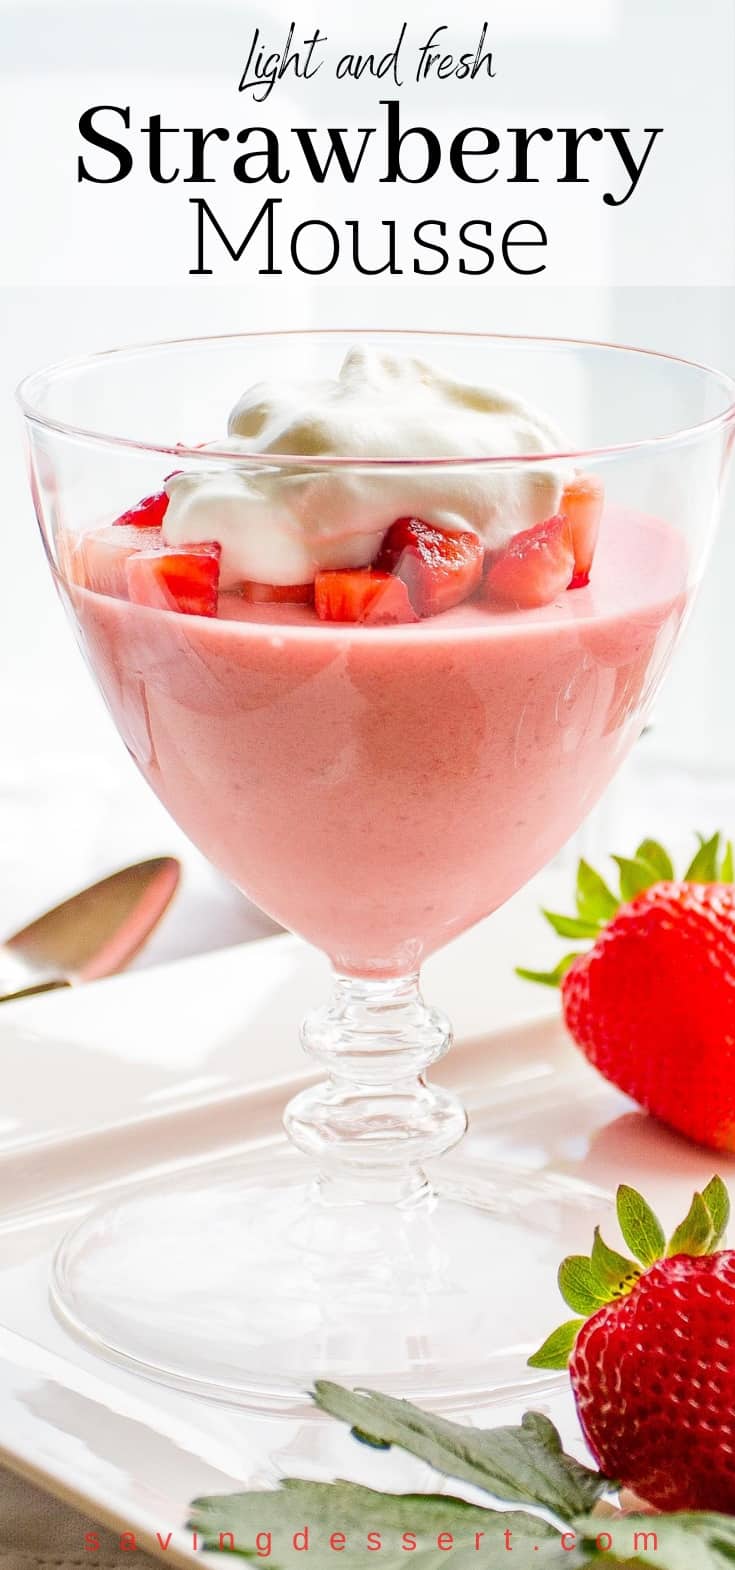 A stemmed serving glass filled with strawberry mousse topped with diced strawberries and whipped cream